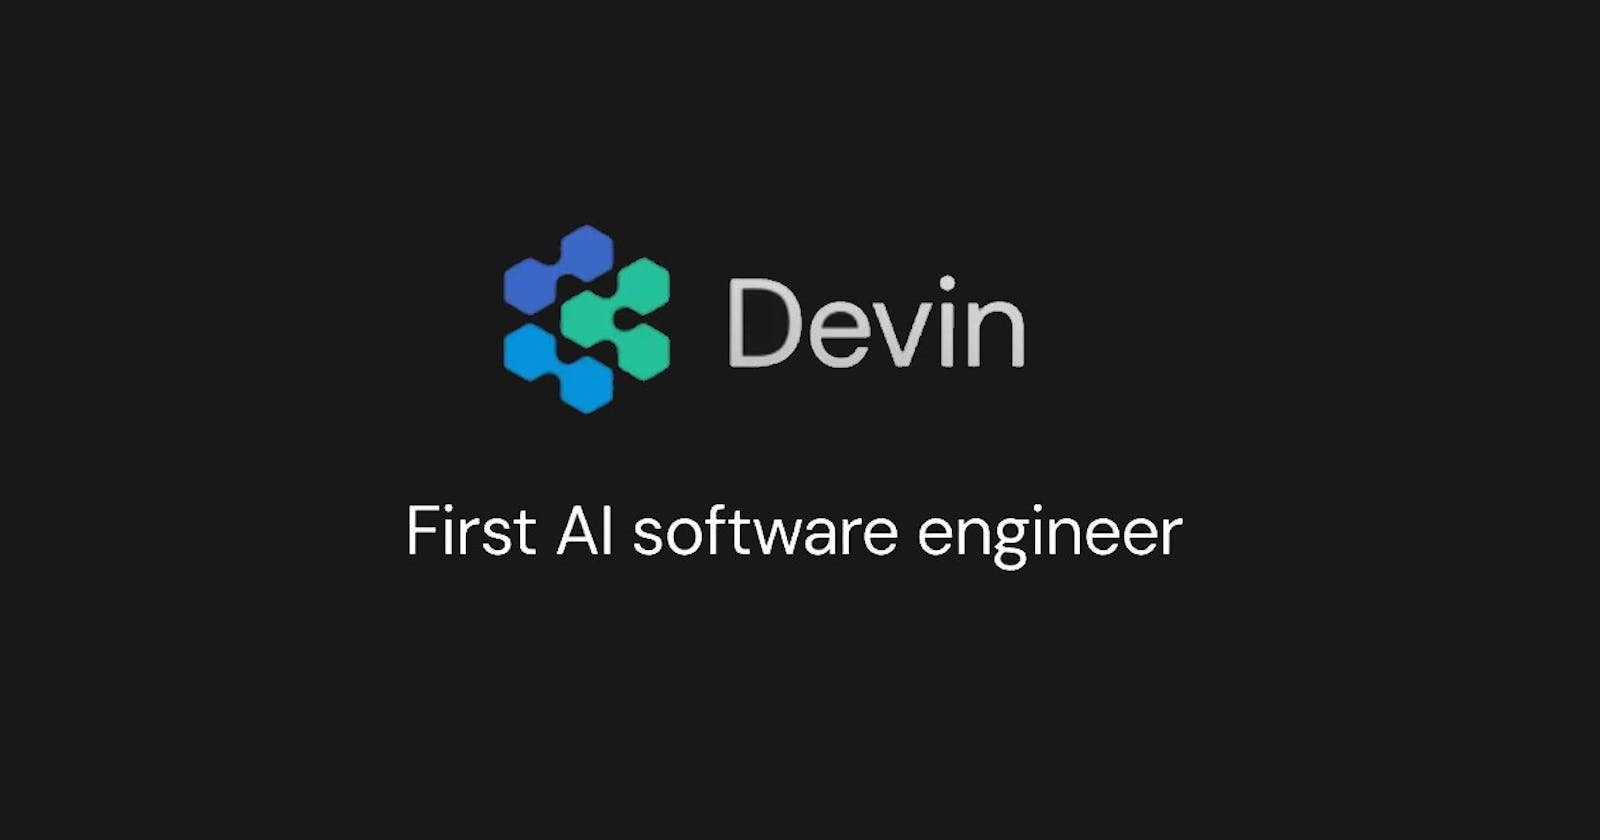 AI Engineer "DEVIN" will take your job?